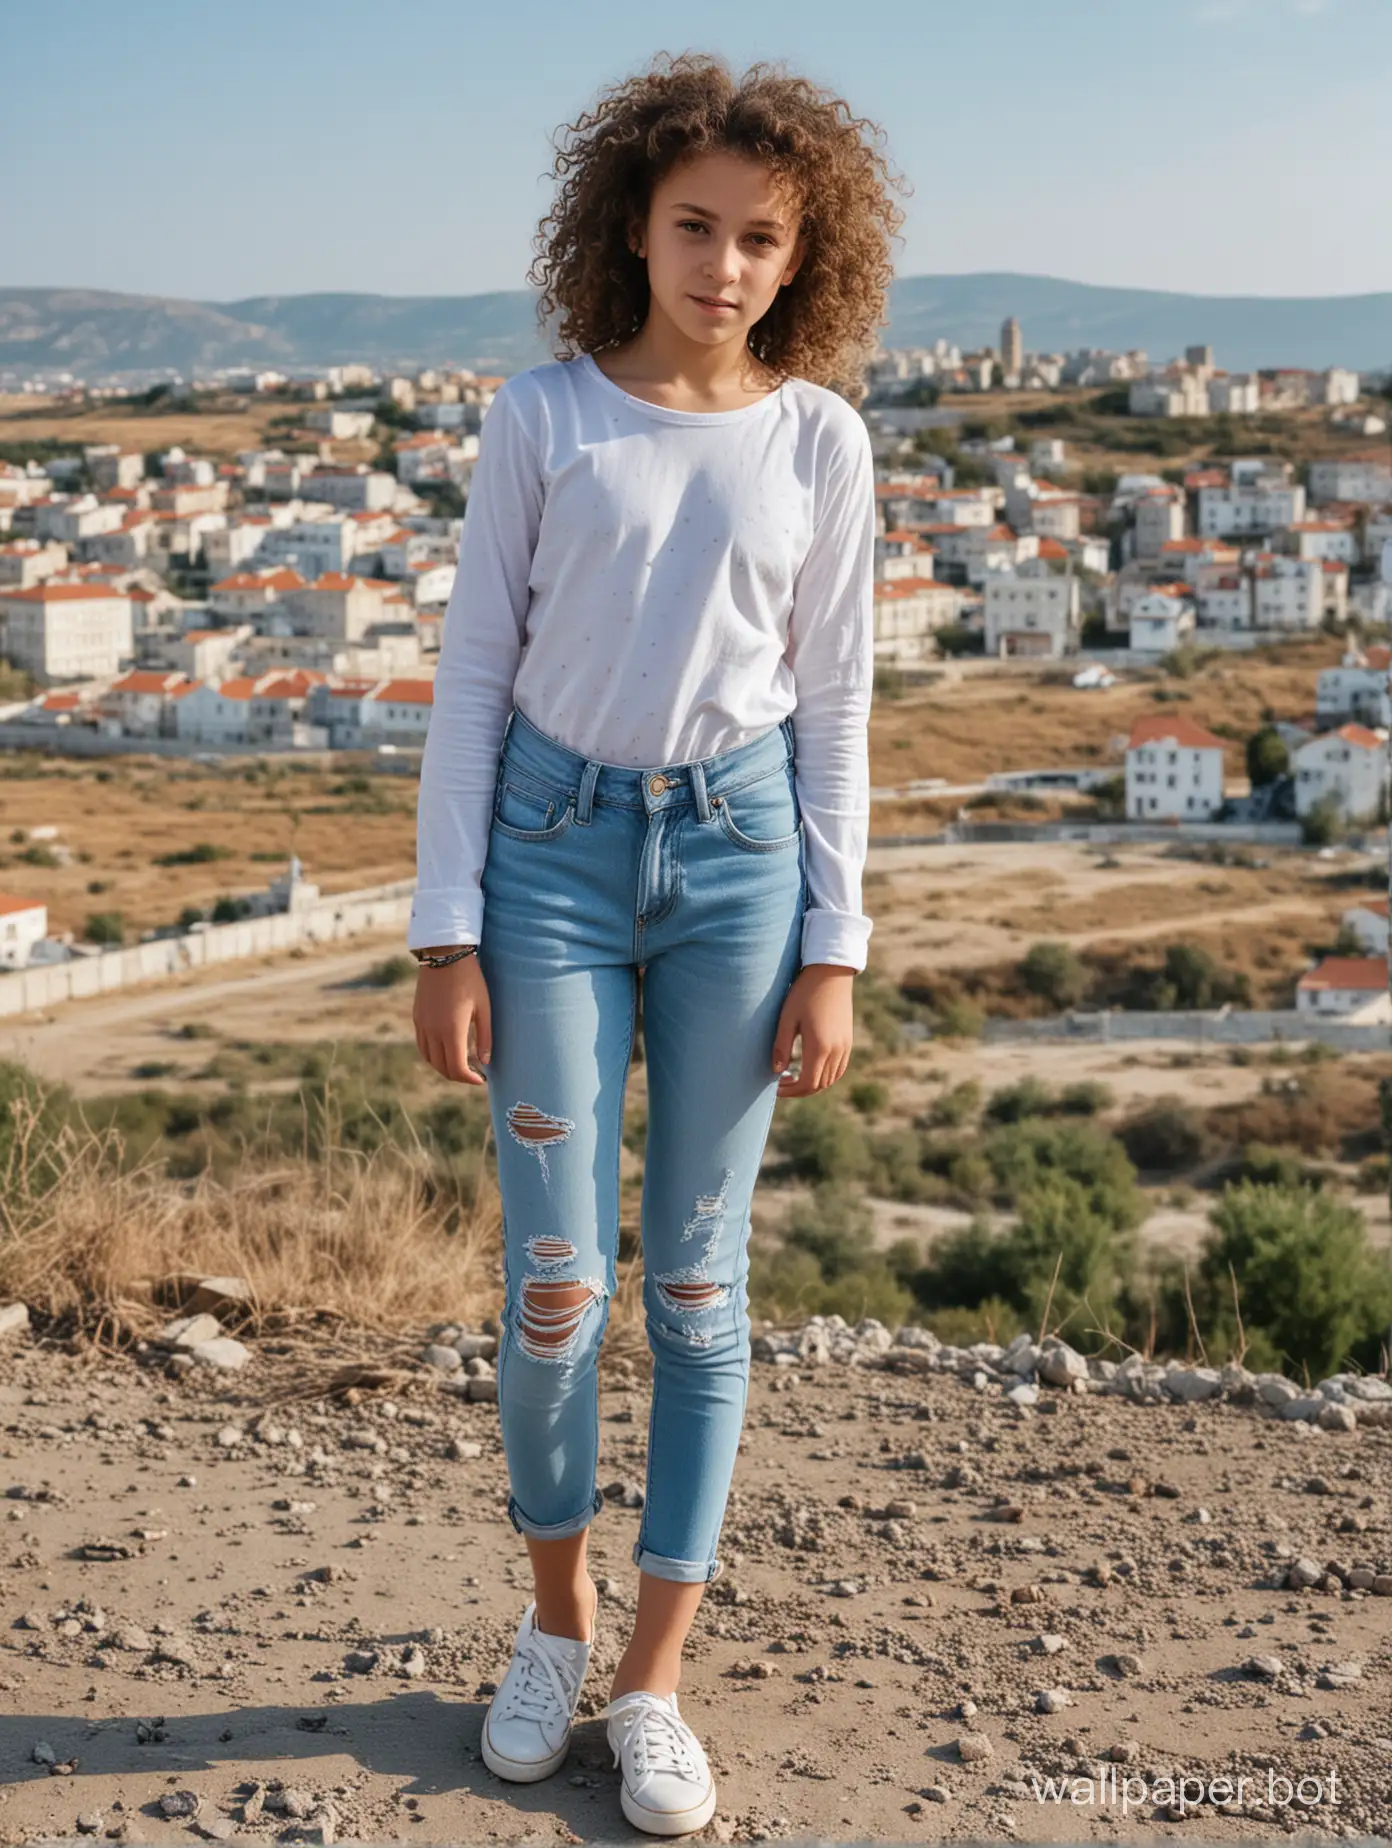 CurlyHaired-11YearOld-Girl-in-Light-Jeans-Charming-Portrait-from-Crimeas-Scenic-Small-Town